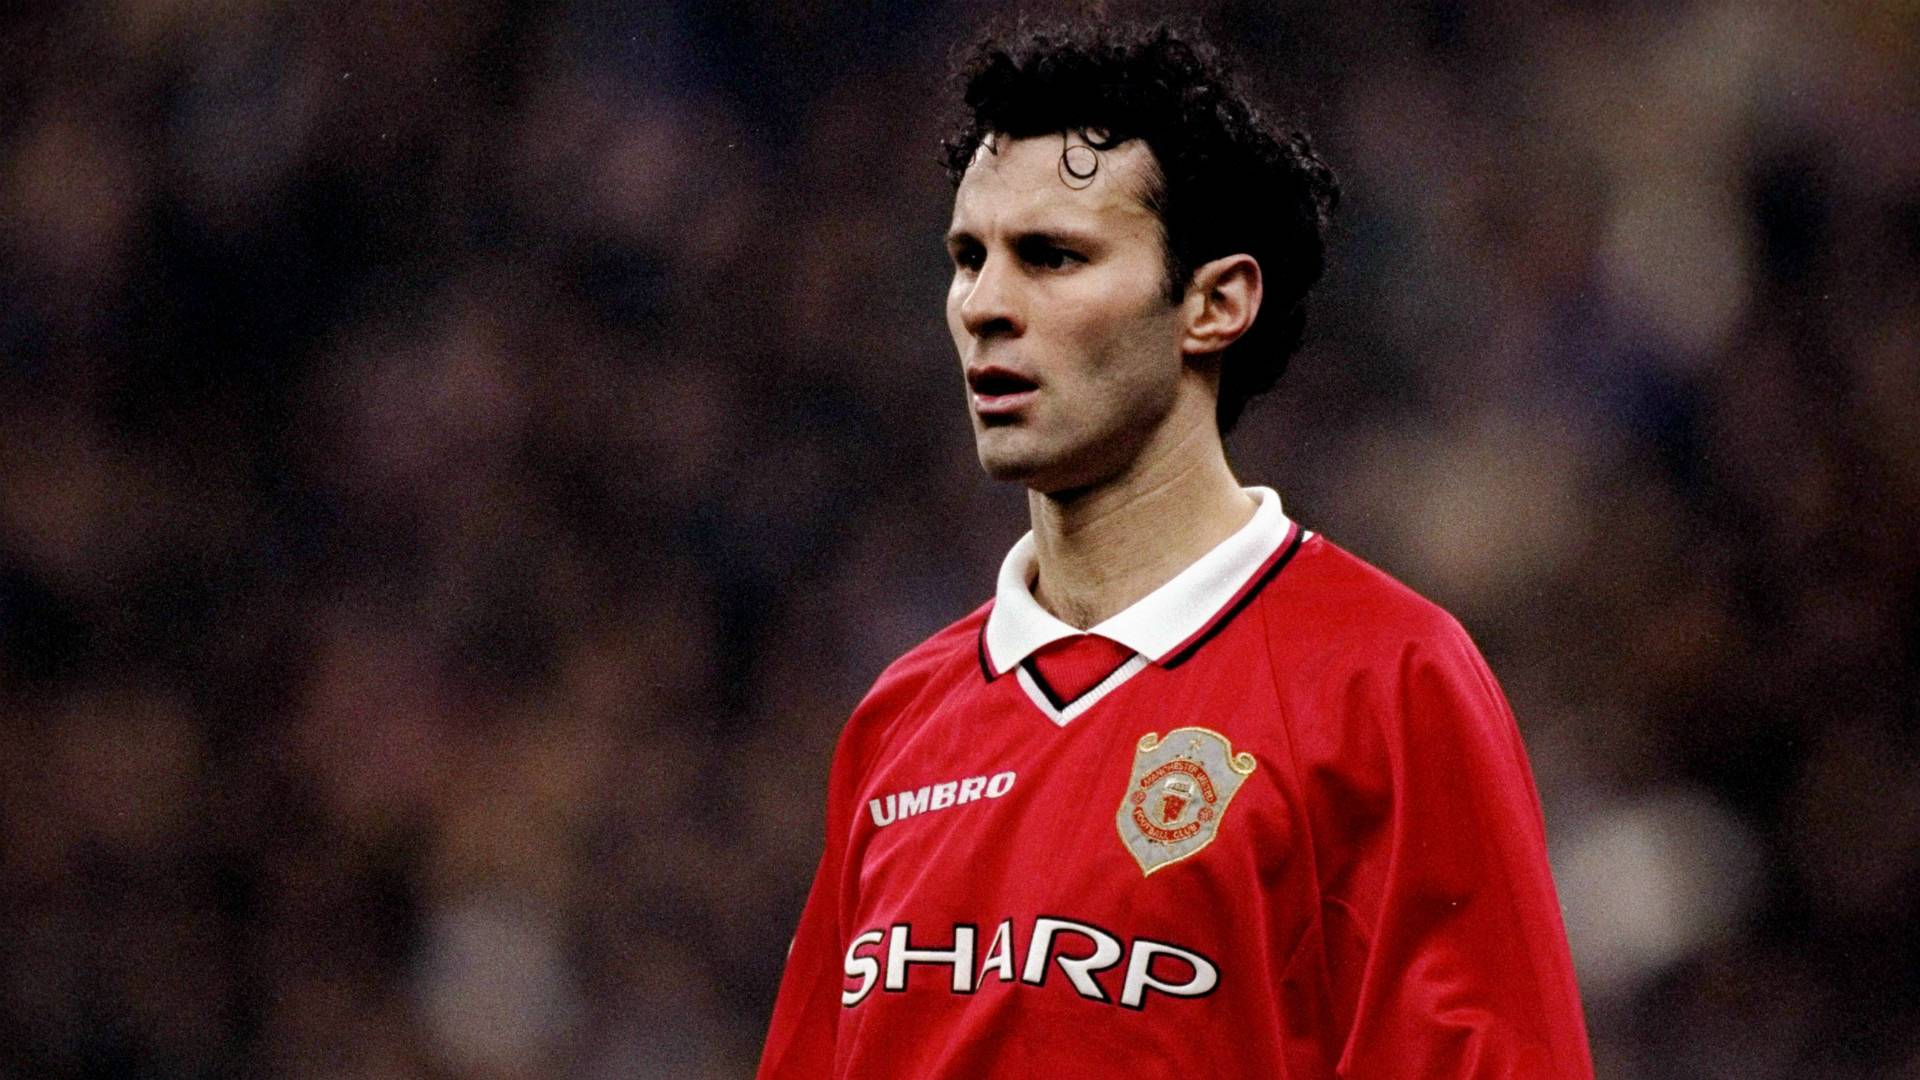 Former Manchester United Ryan Giggs charged with assaulting two women